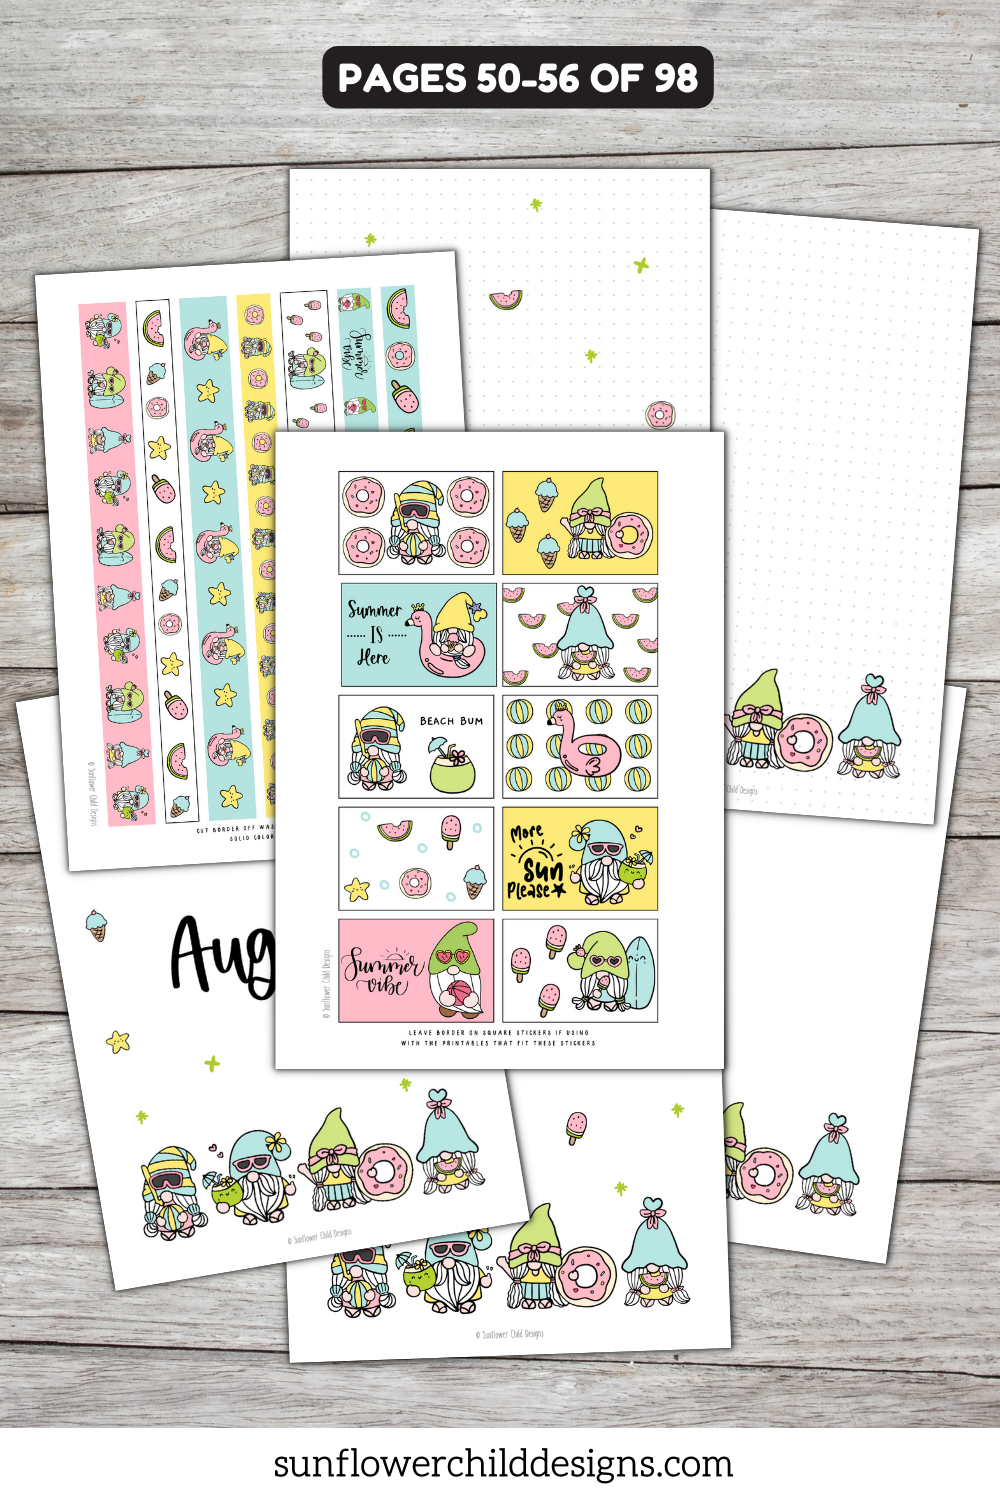 Birthday Gnome Clipart Printable Stickers for Digital Planners